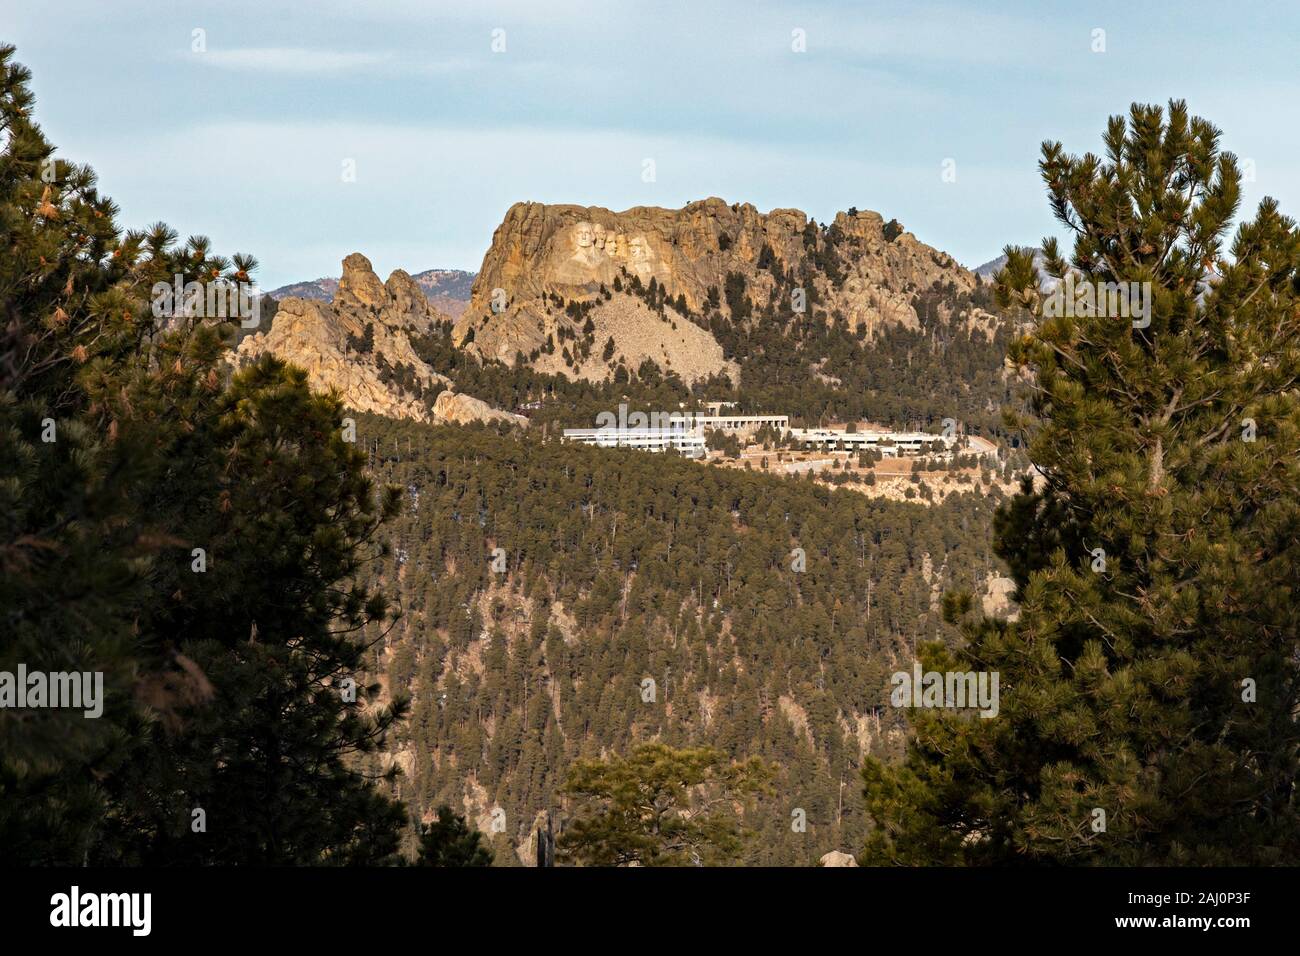 Keystone, South Dakota - Mount Rushmore National Memorial, from the Norbeck Overlook on Iron Mountain. Stock Photo